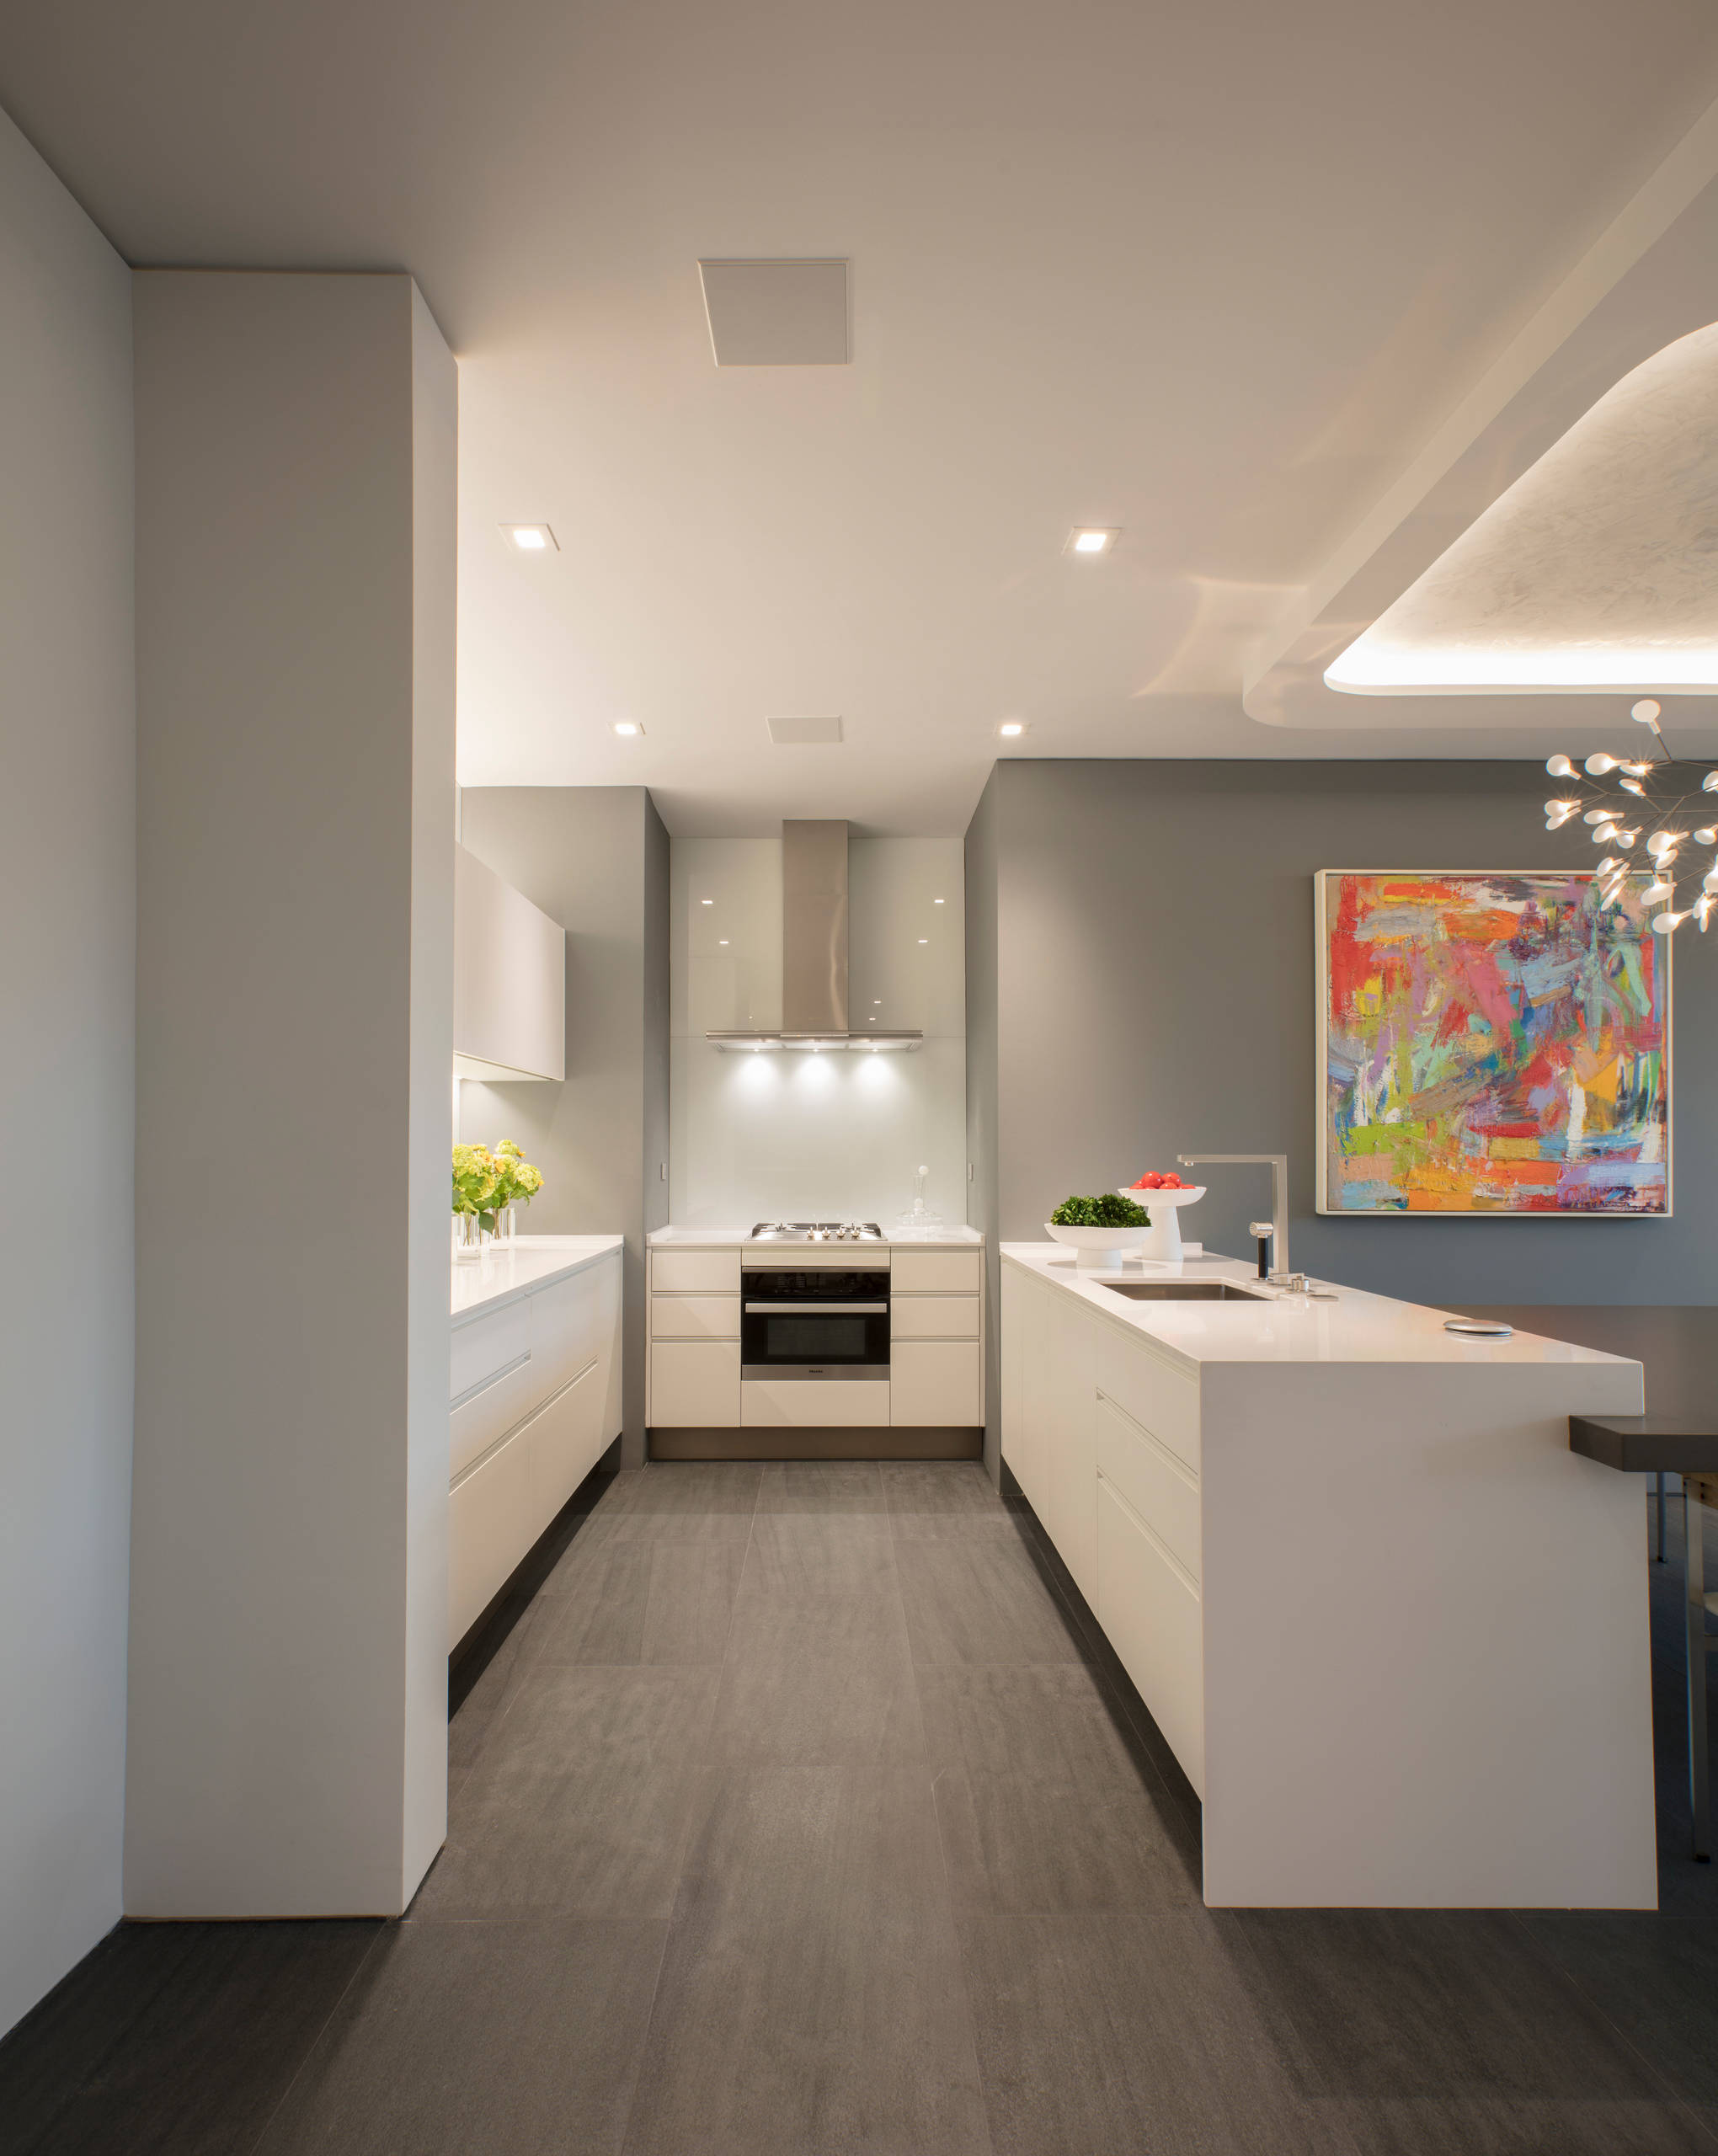 20 Small Modern Kitchen Ideas You'll Love   March, 20   Houzz